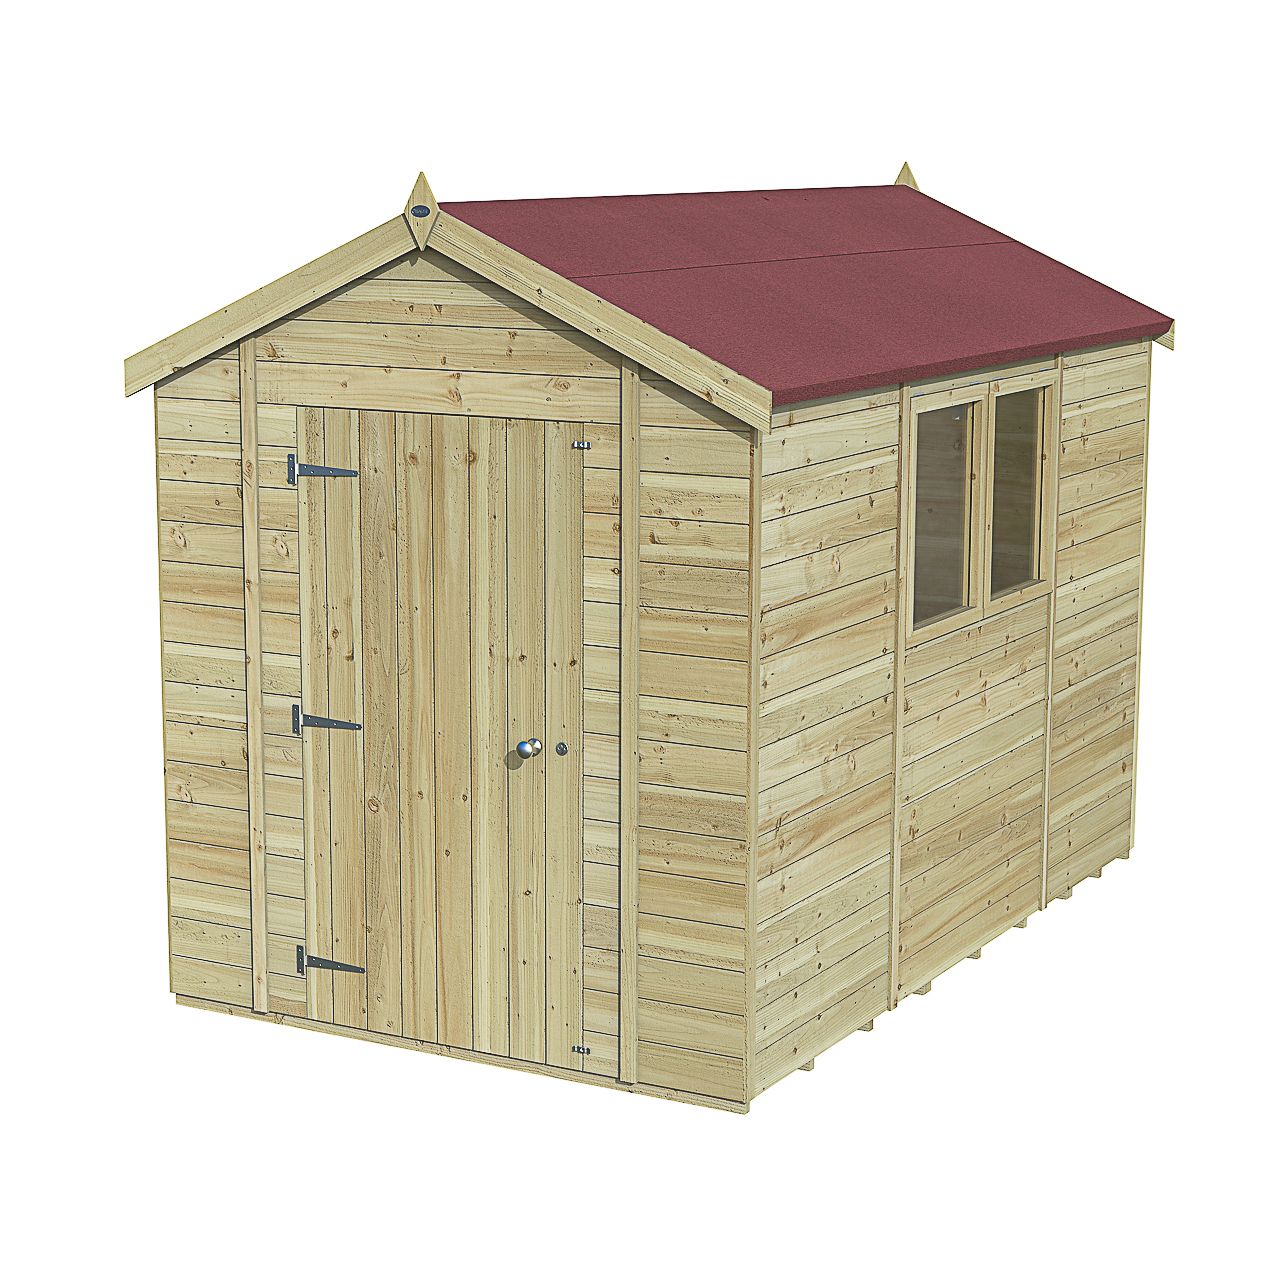 Forest Garden Timberdale 10x6 ft Apex Wooden Shed with floor